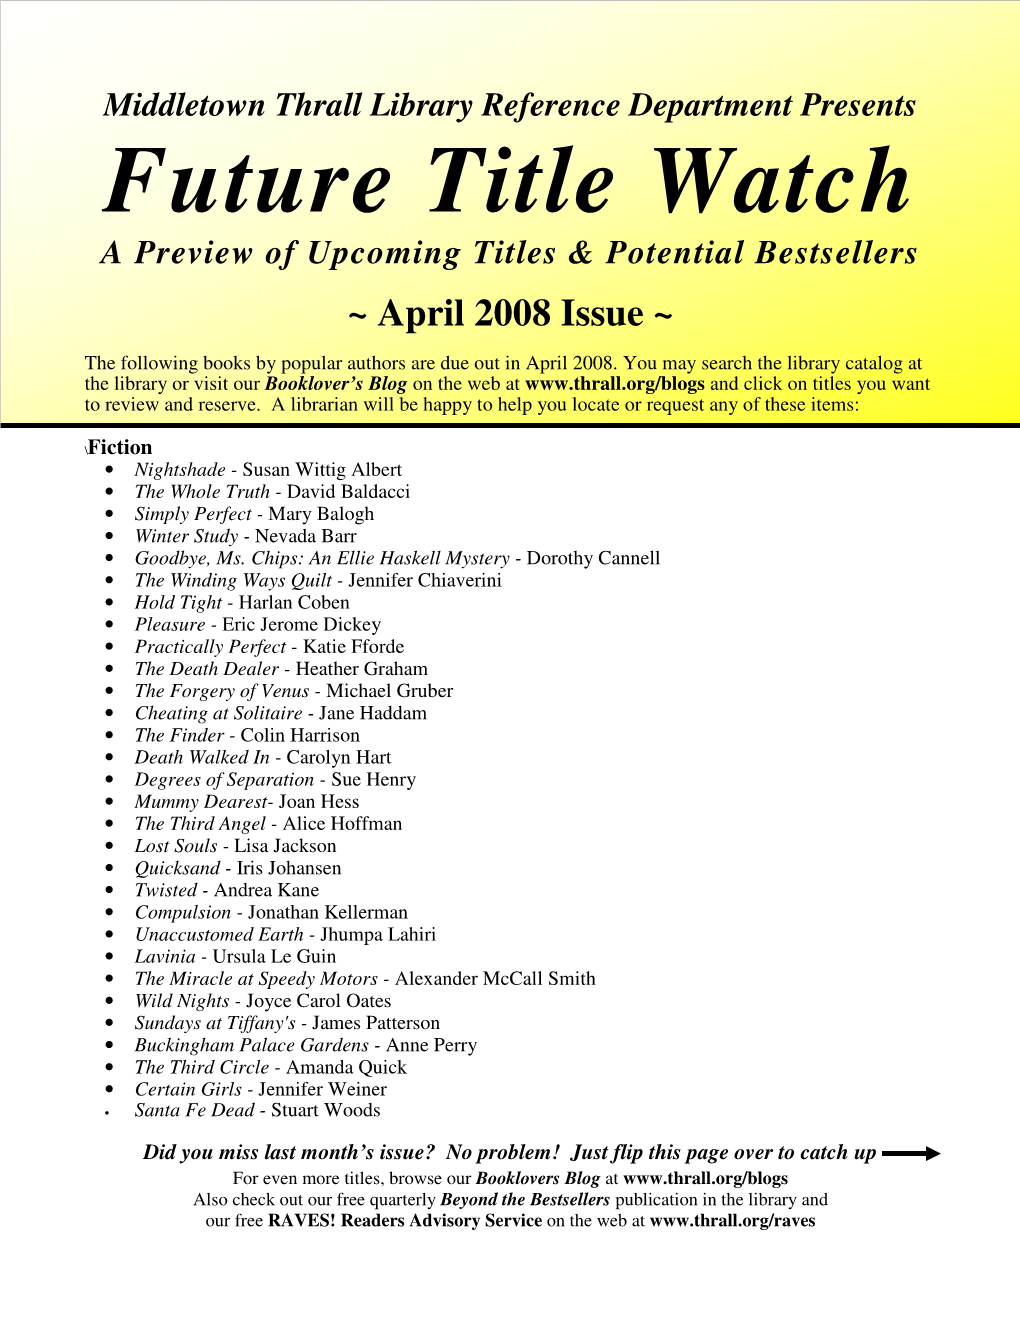 Future Title Watch a Preview of Upcoming Titles & Potential Bestsellers